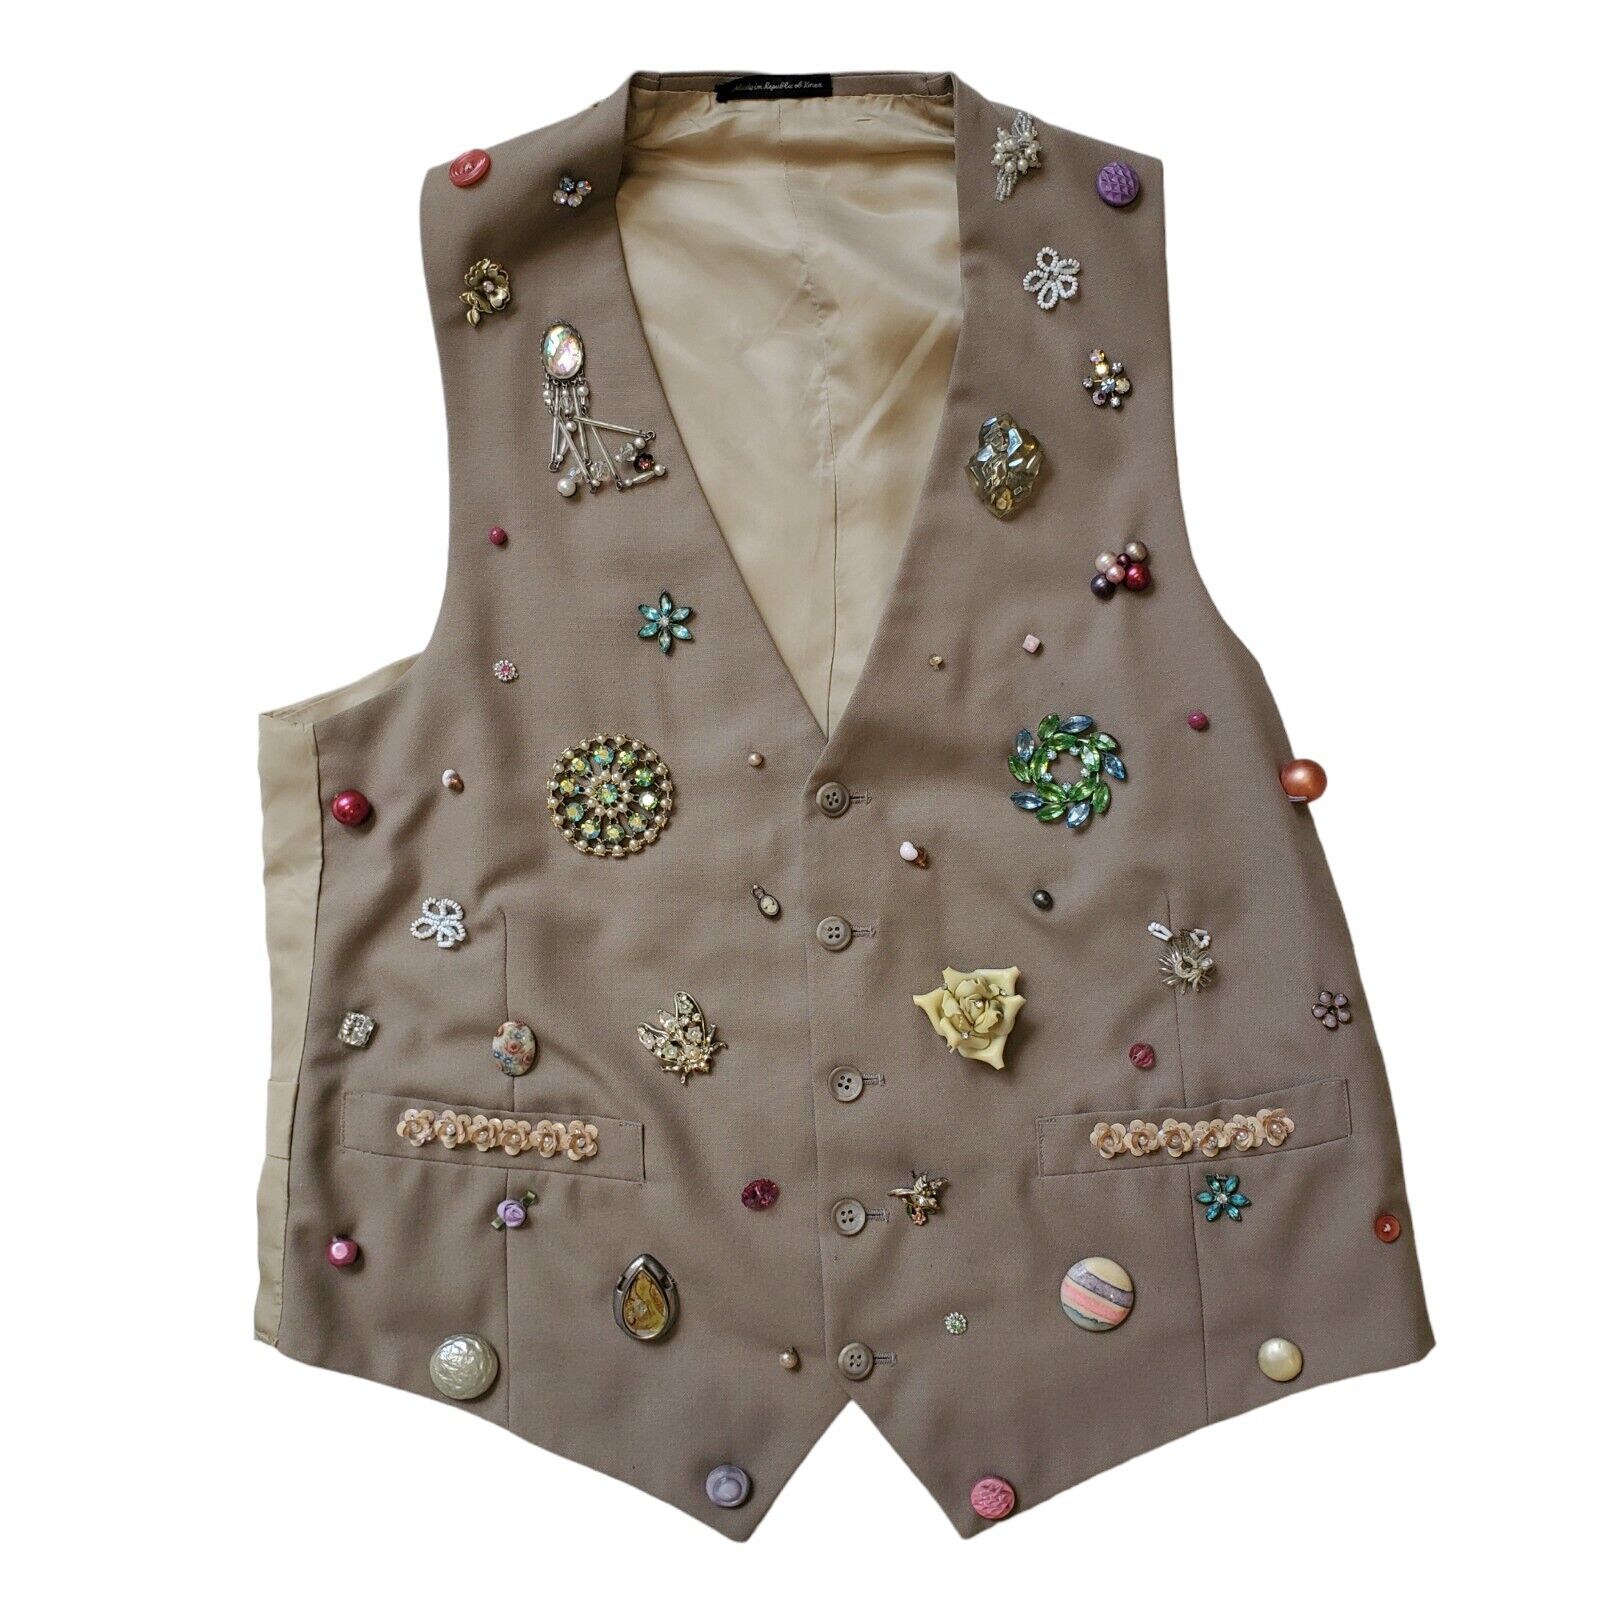 ANNETTE FUNICELLO Personal Property (Vest) With Hand Sewn Jewelry Embellishments